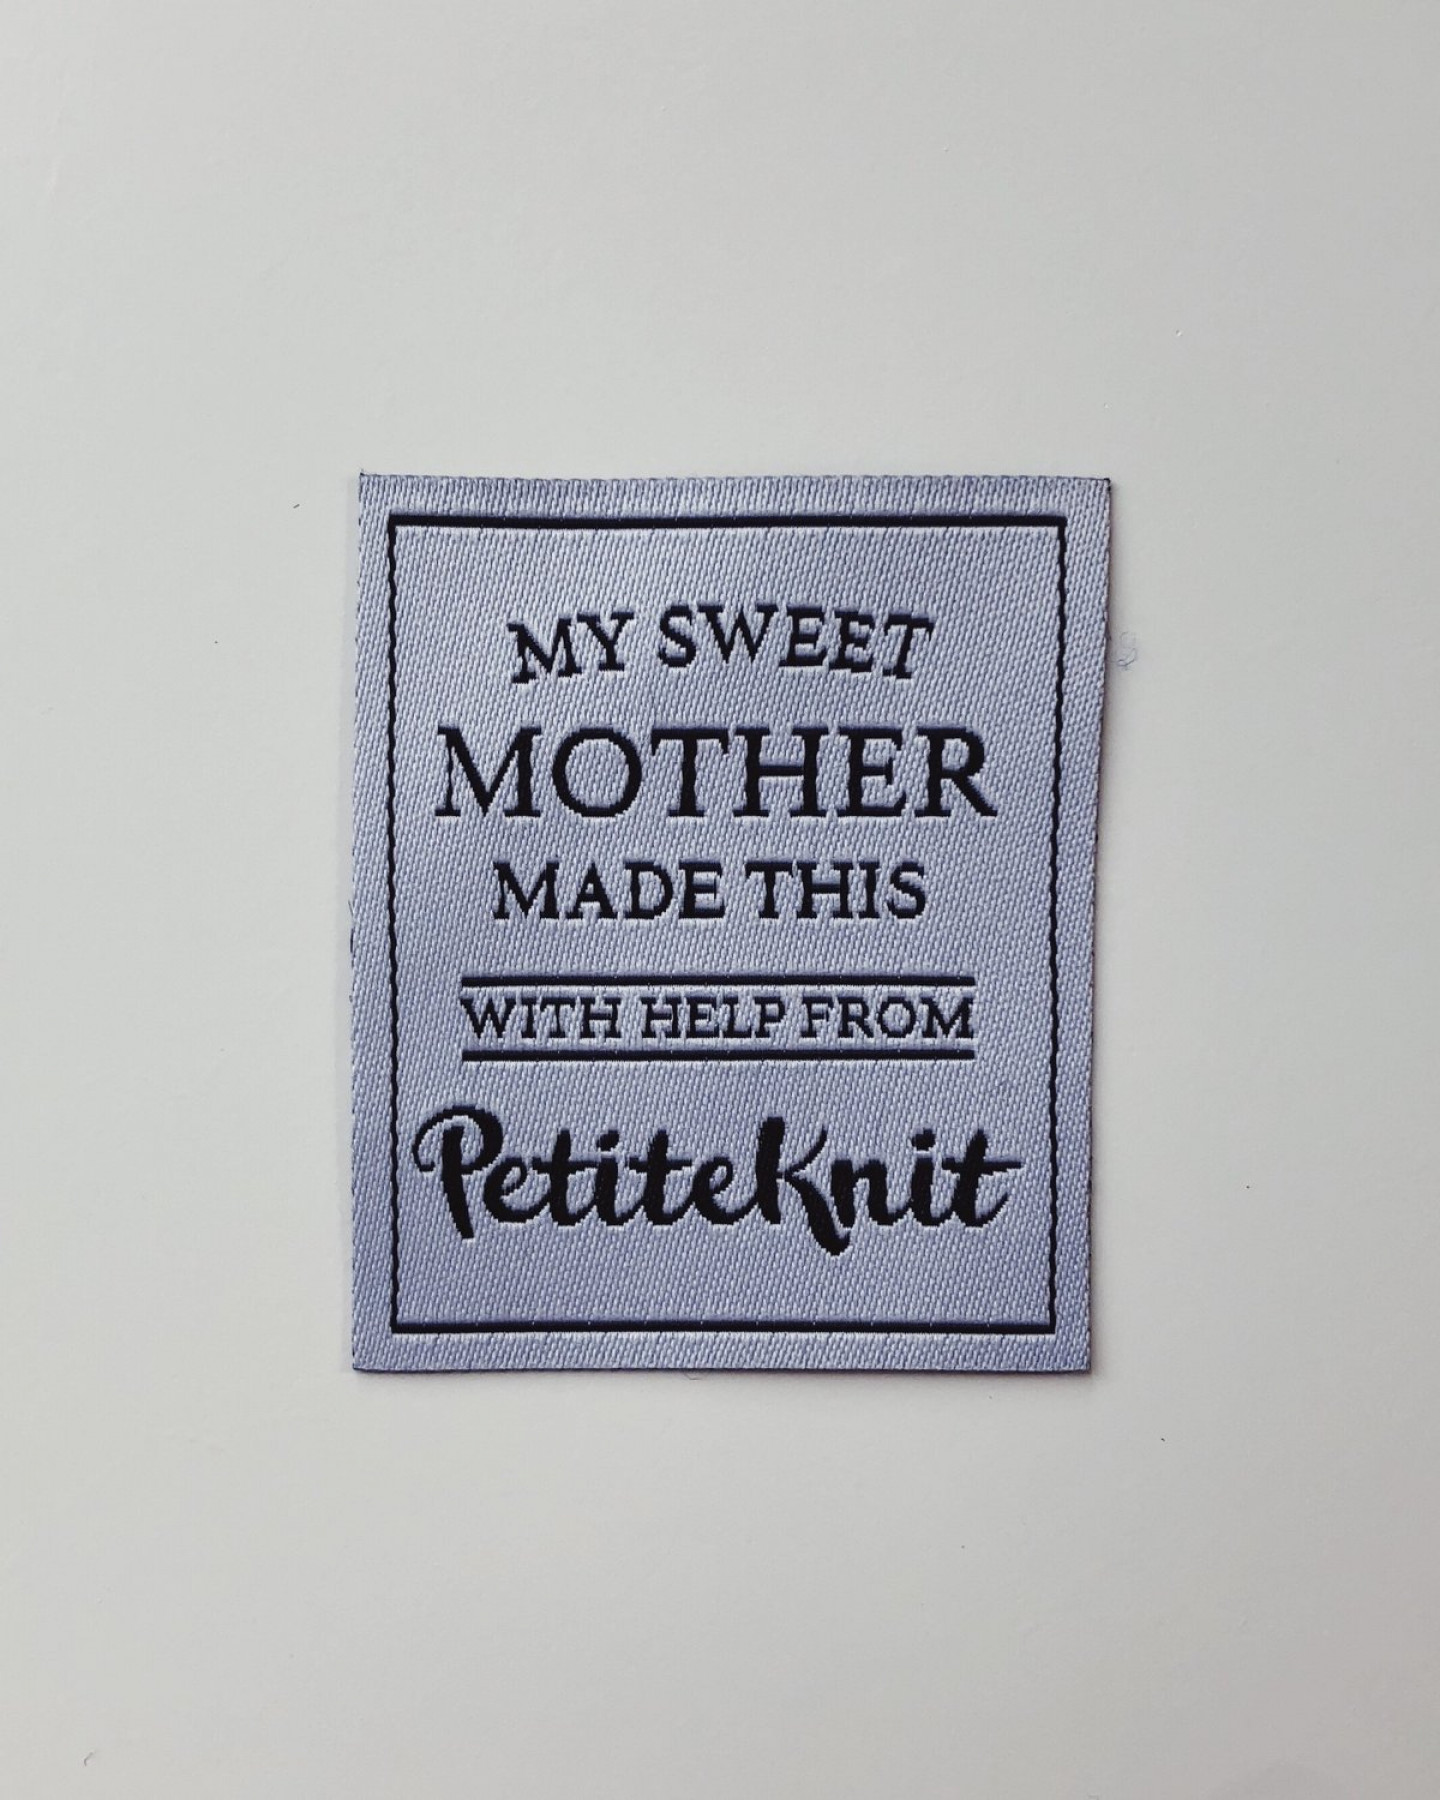 "My Sweet Mother Made This" by PetiteKnit -label